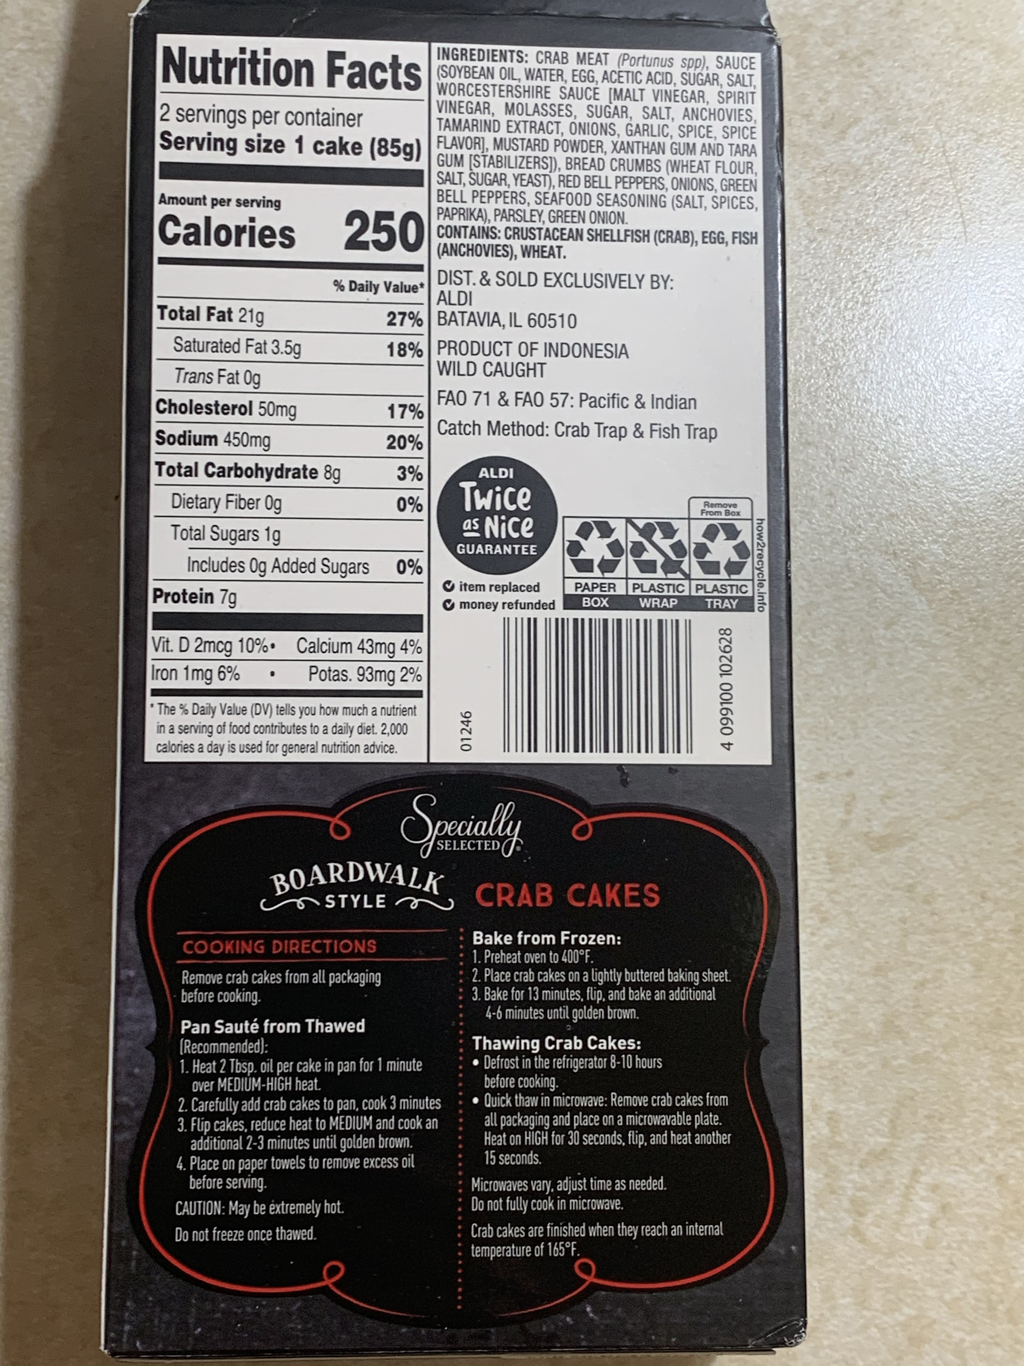 Specially Selected Boardwalk Crab Cakes Aldi Review Cooking Instructions and Nutrition Facts